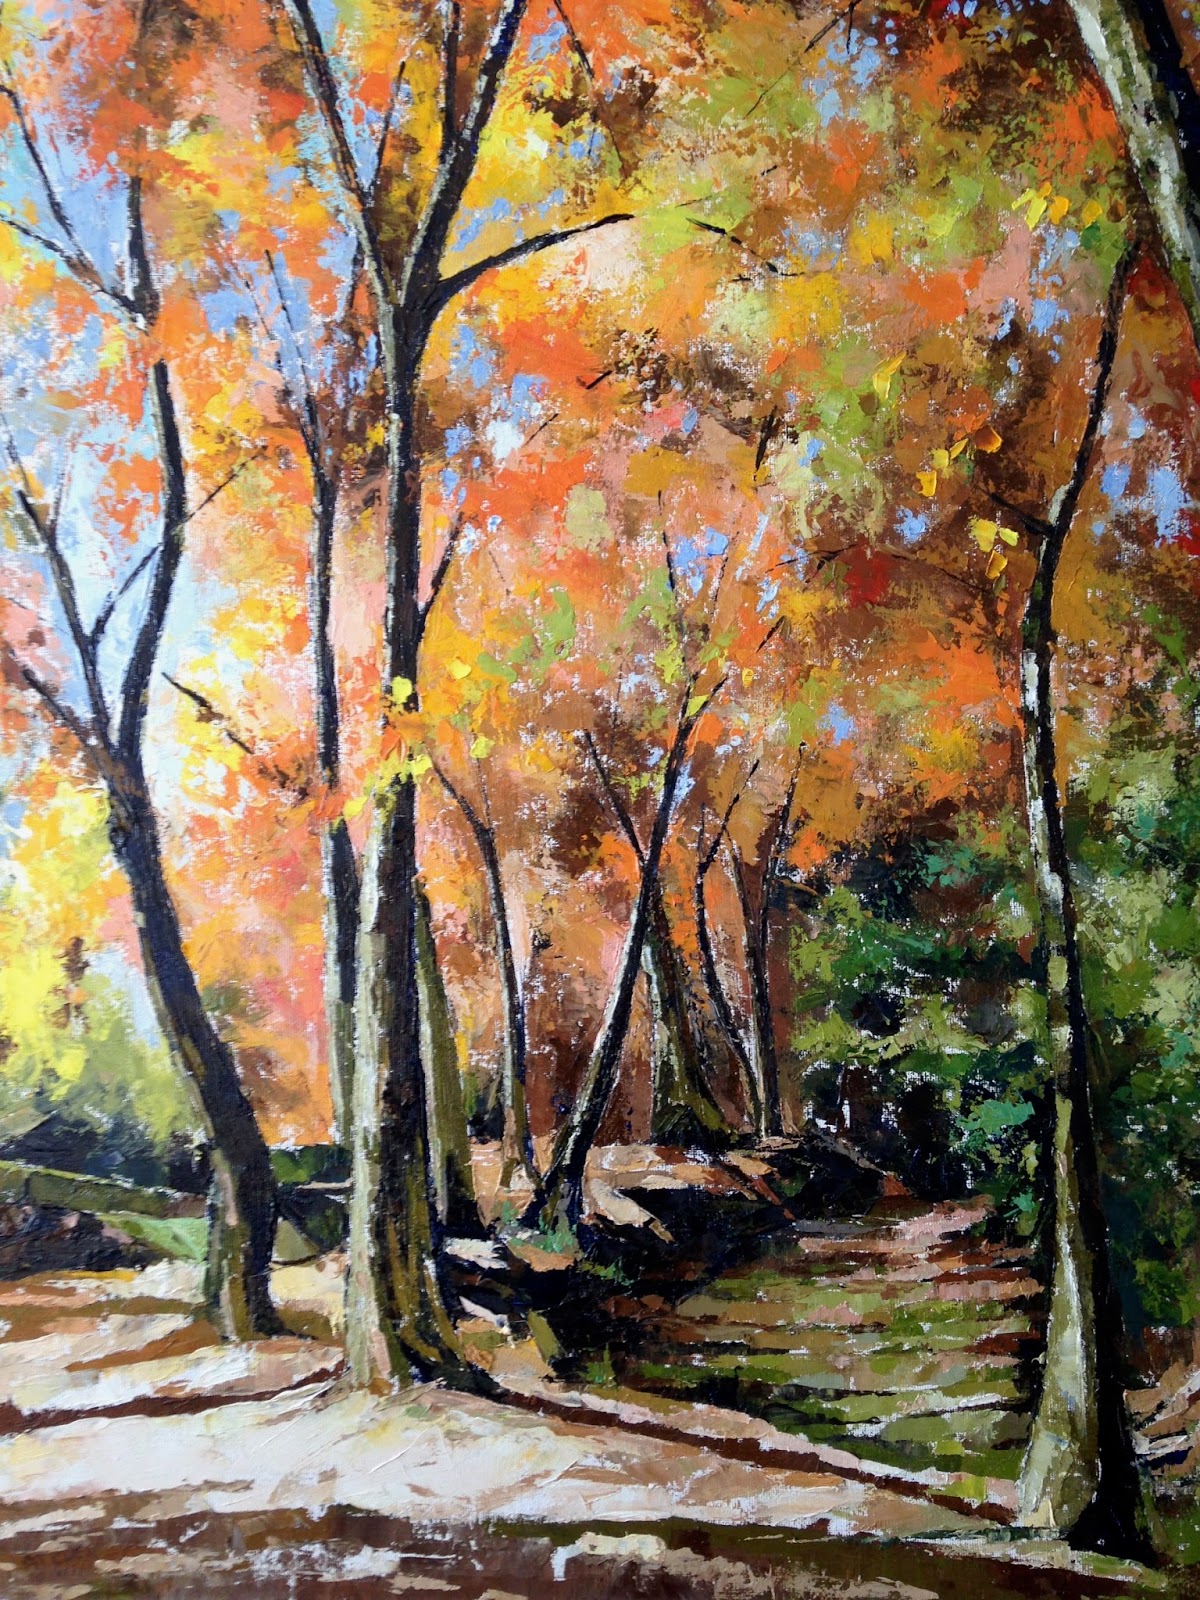 xichen automnei peinture paysage theartcycle photo_principale.jpg The Art Cycle